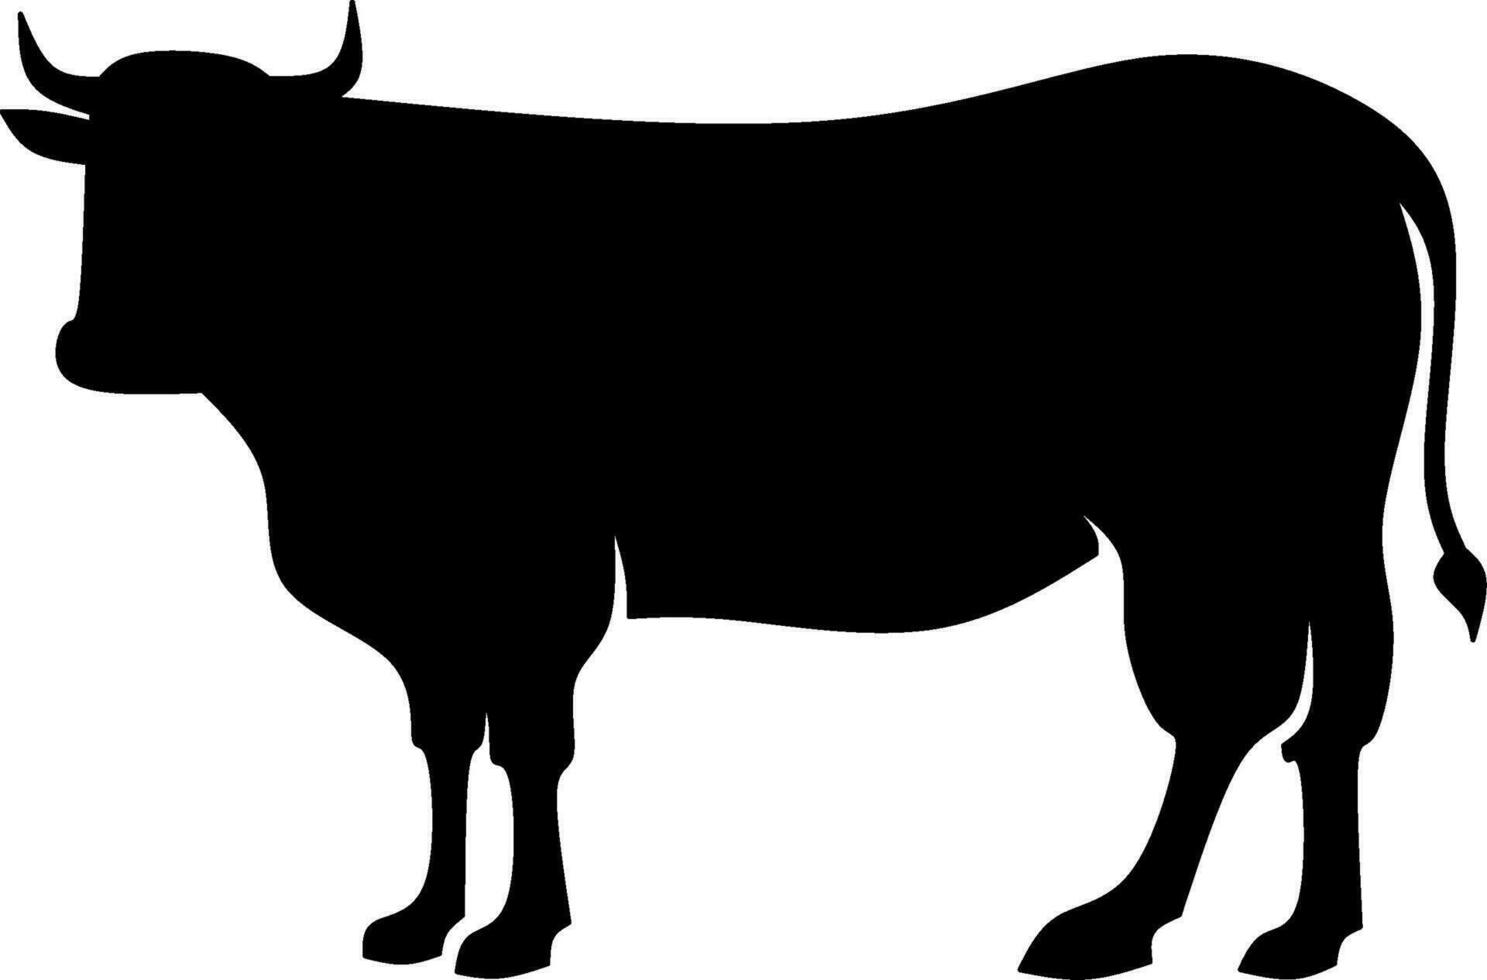 Cattle icon vector illustration. Silhouette cow icon for livestock, food, animal and eid al adha event. Graphic resource for qurban design in islam and muslim culture